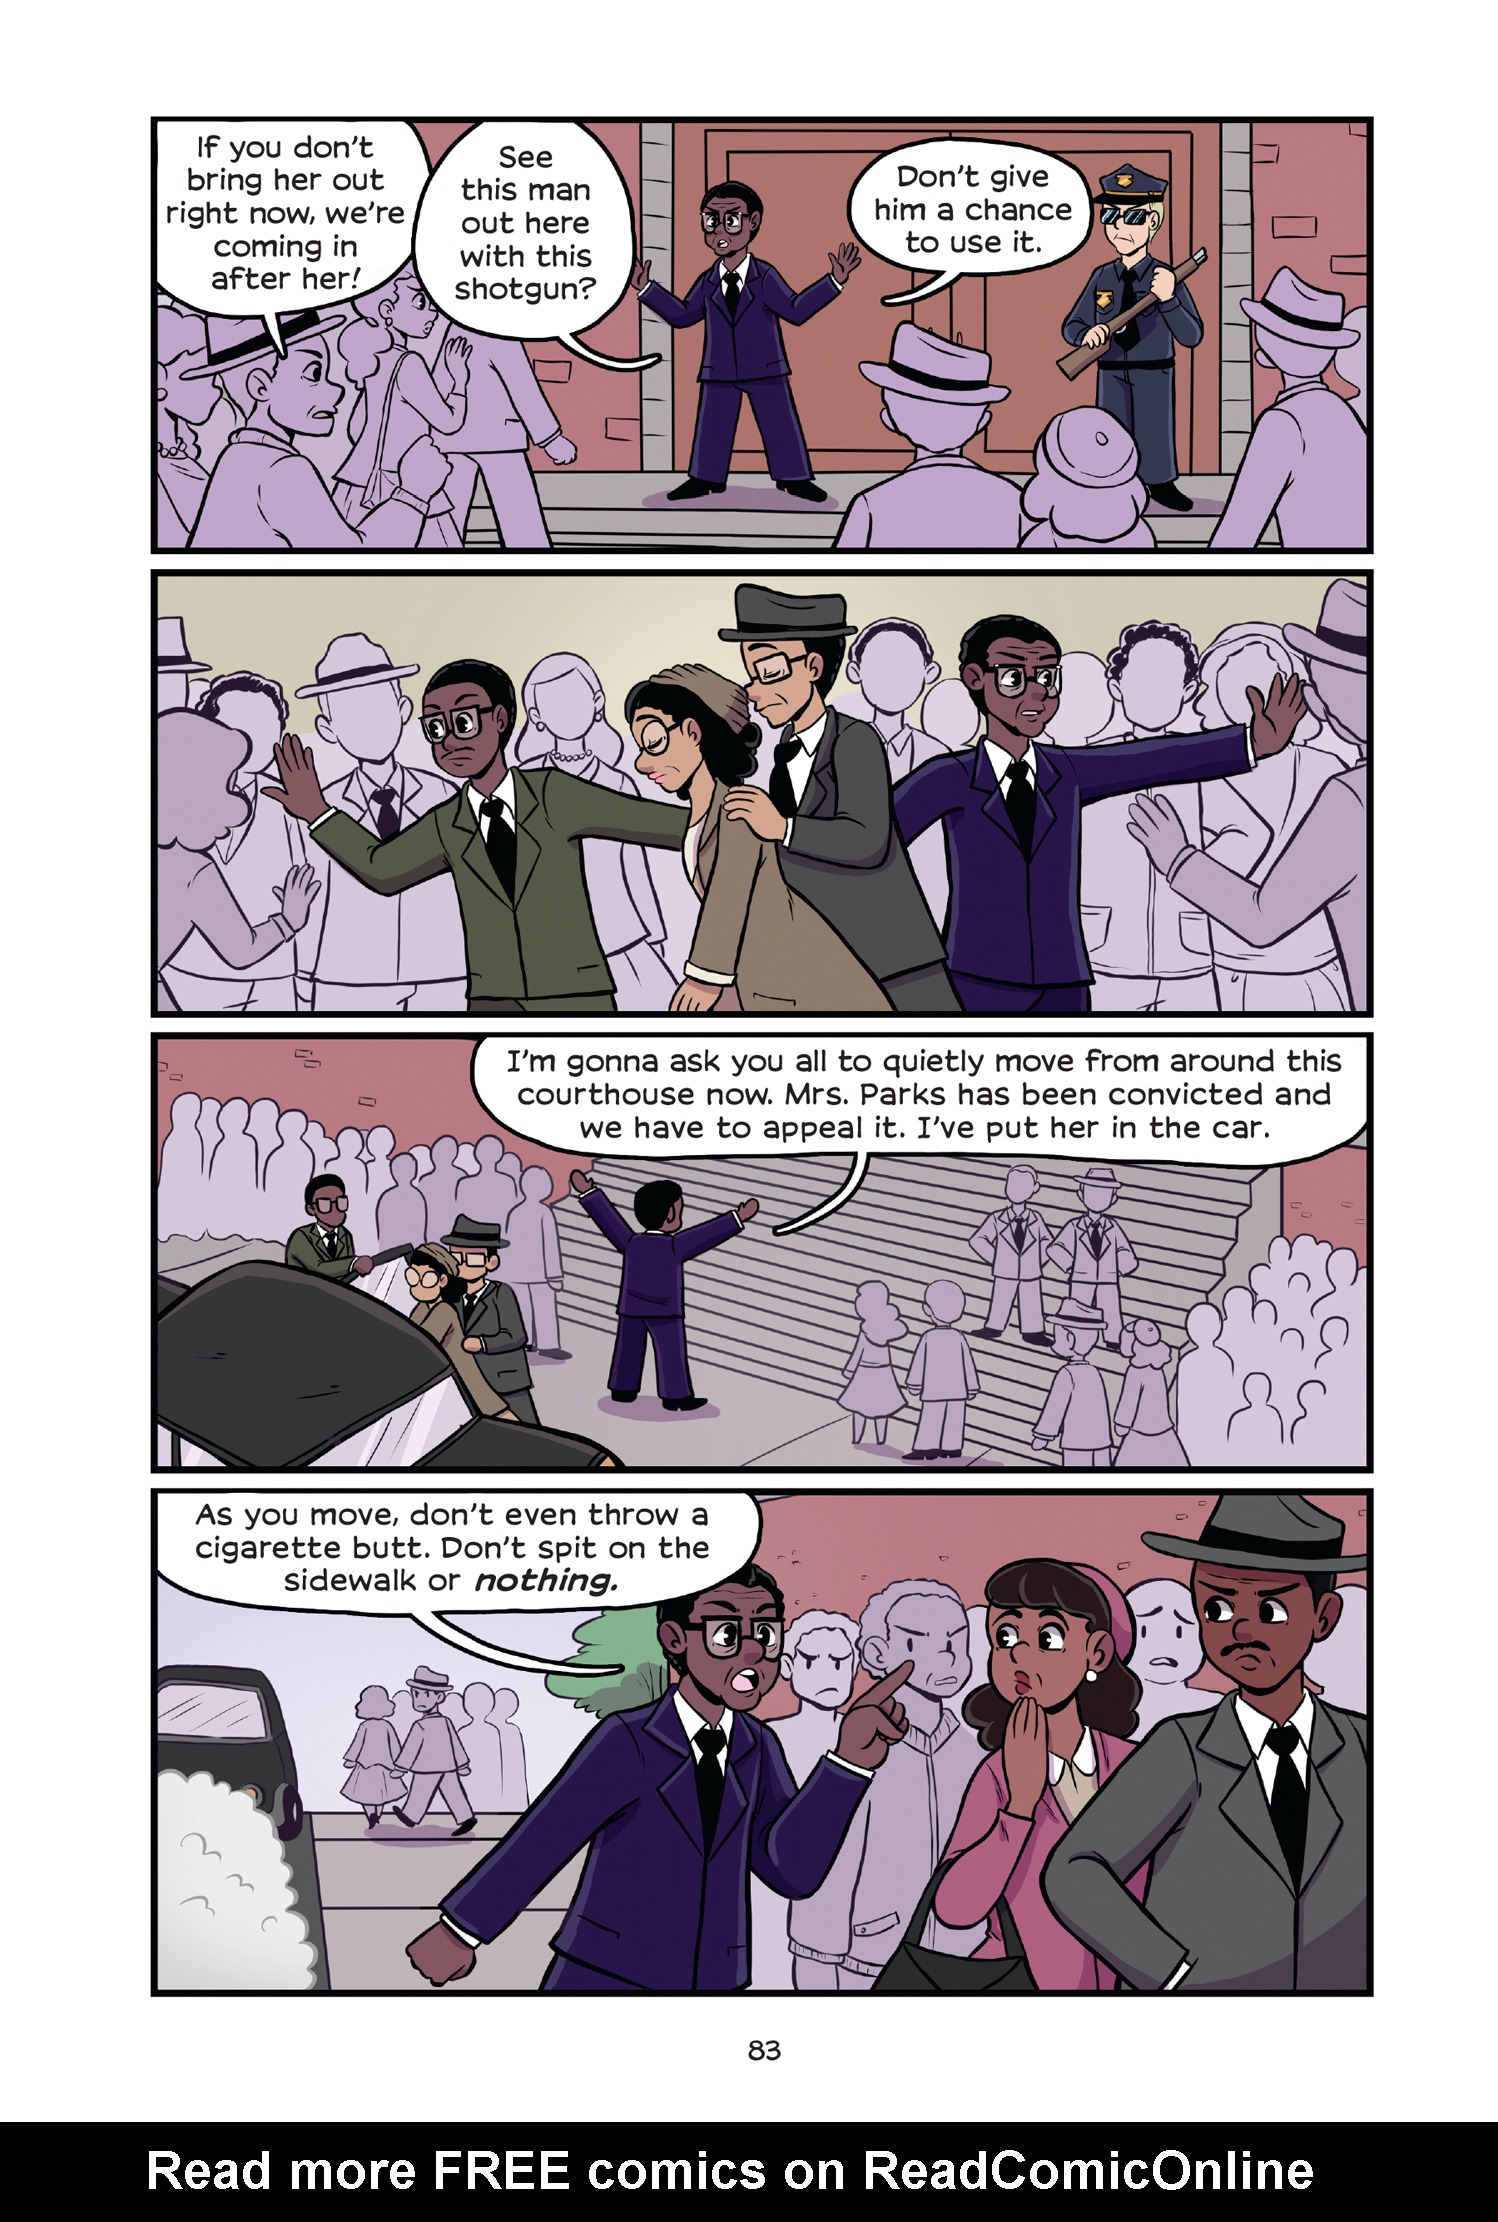 Read online History Comics comic -  Issue # Rosa Parks & Claudette Colvin - Civil Rights Heroes - 88